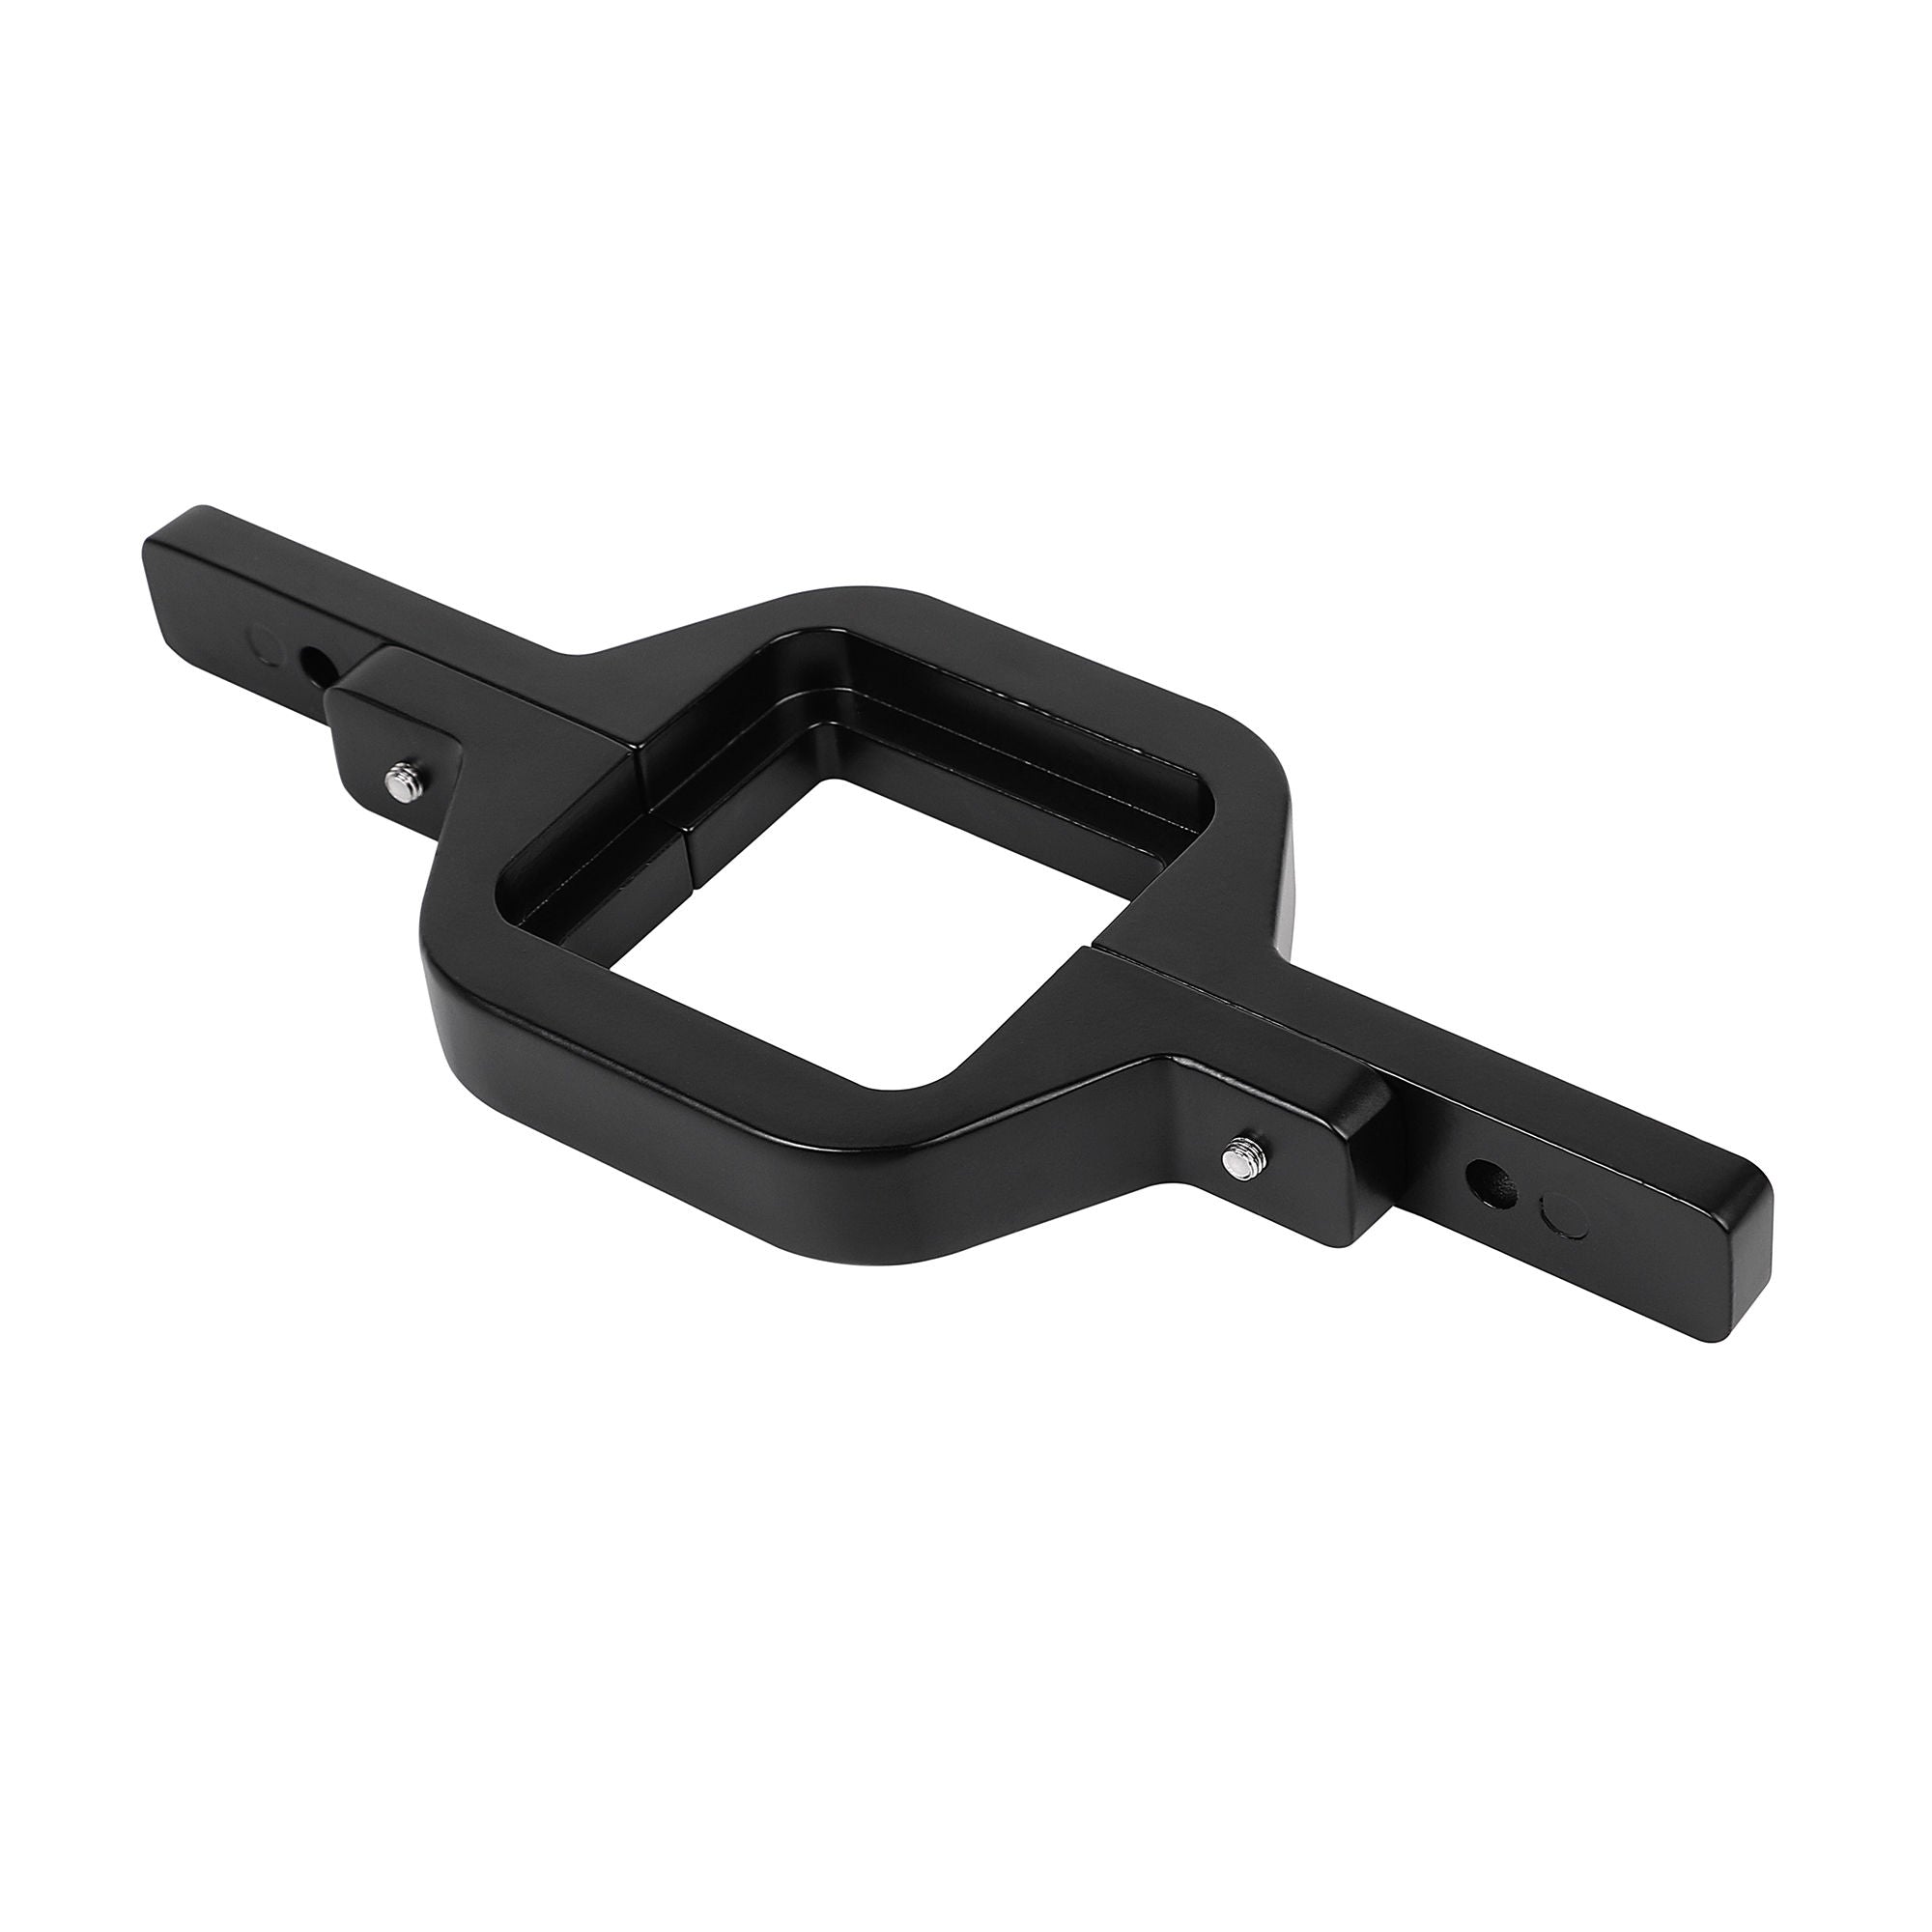 RTX RTXOA870024 - 2-2.5 inches towing hitch light mount bracket for trucks trailers RVs SUVs